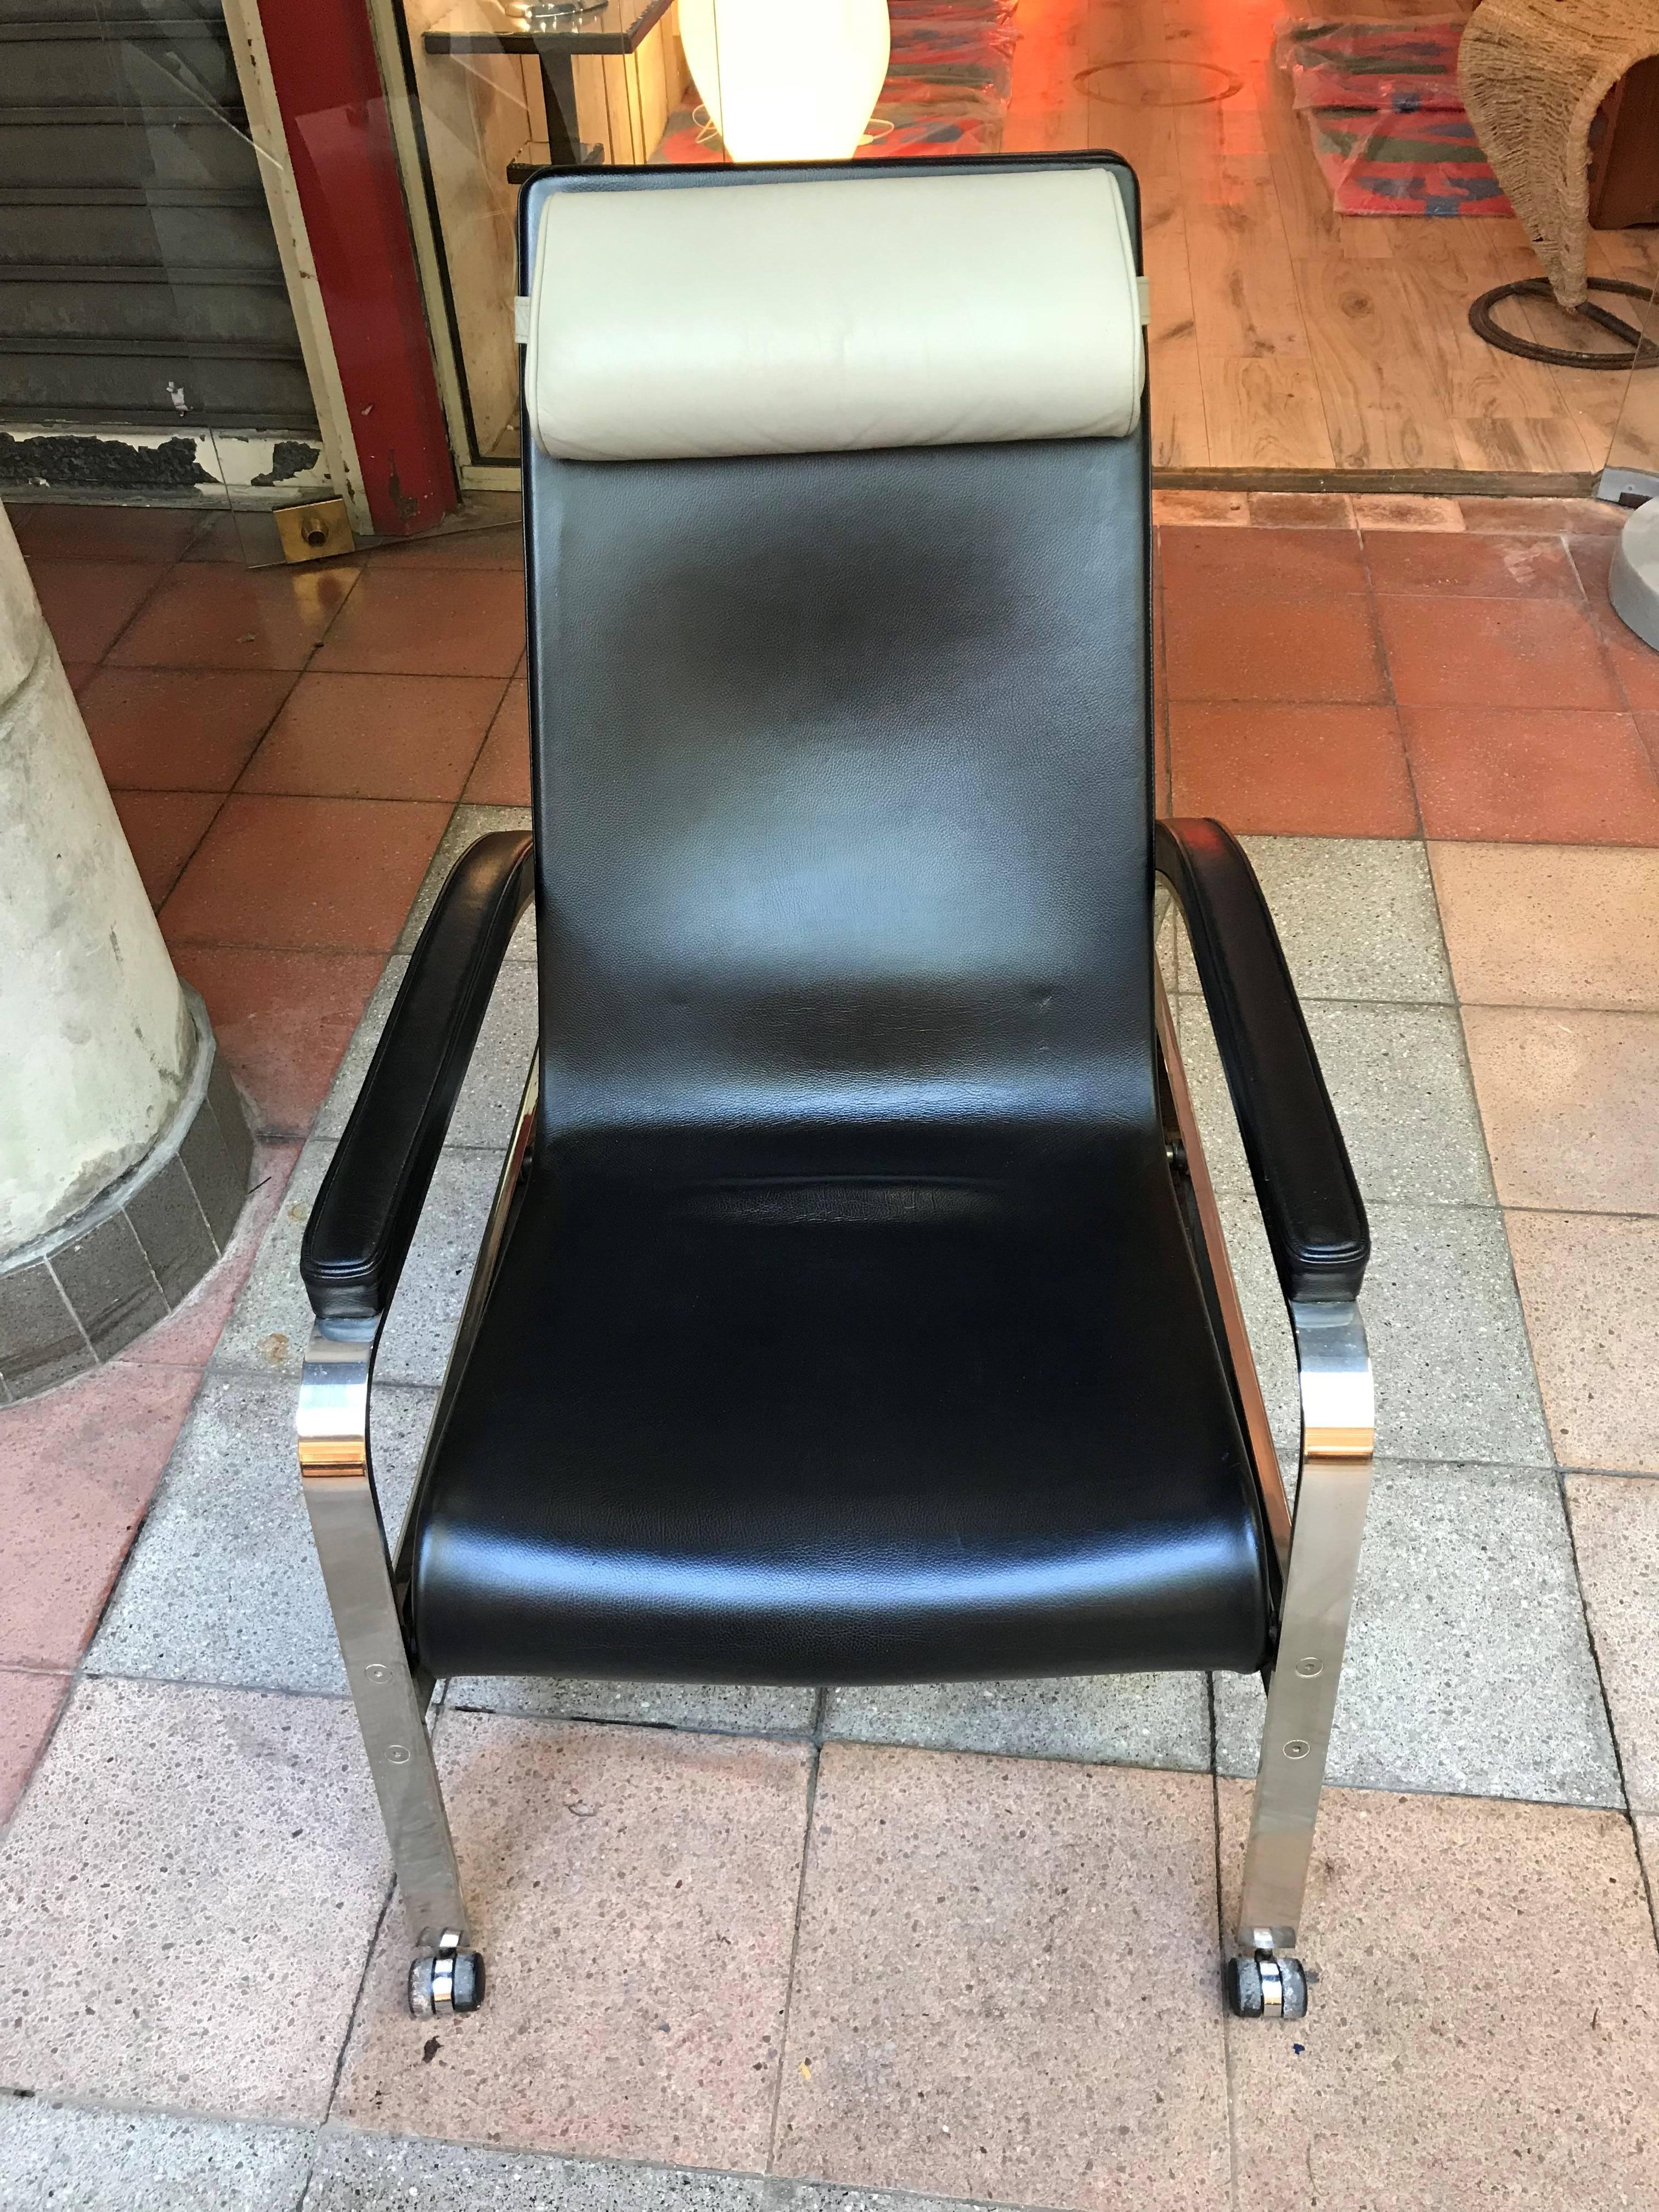 Technical edition of 100 copies
Signed 
Black leather/ gray leather headrest
Excellent condition 
Sliding seat: both armchair and lounge chair.